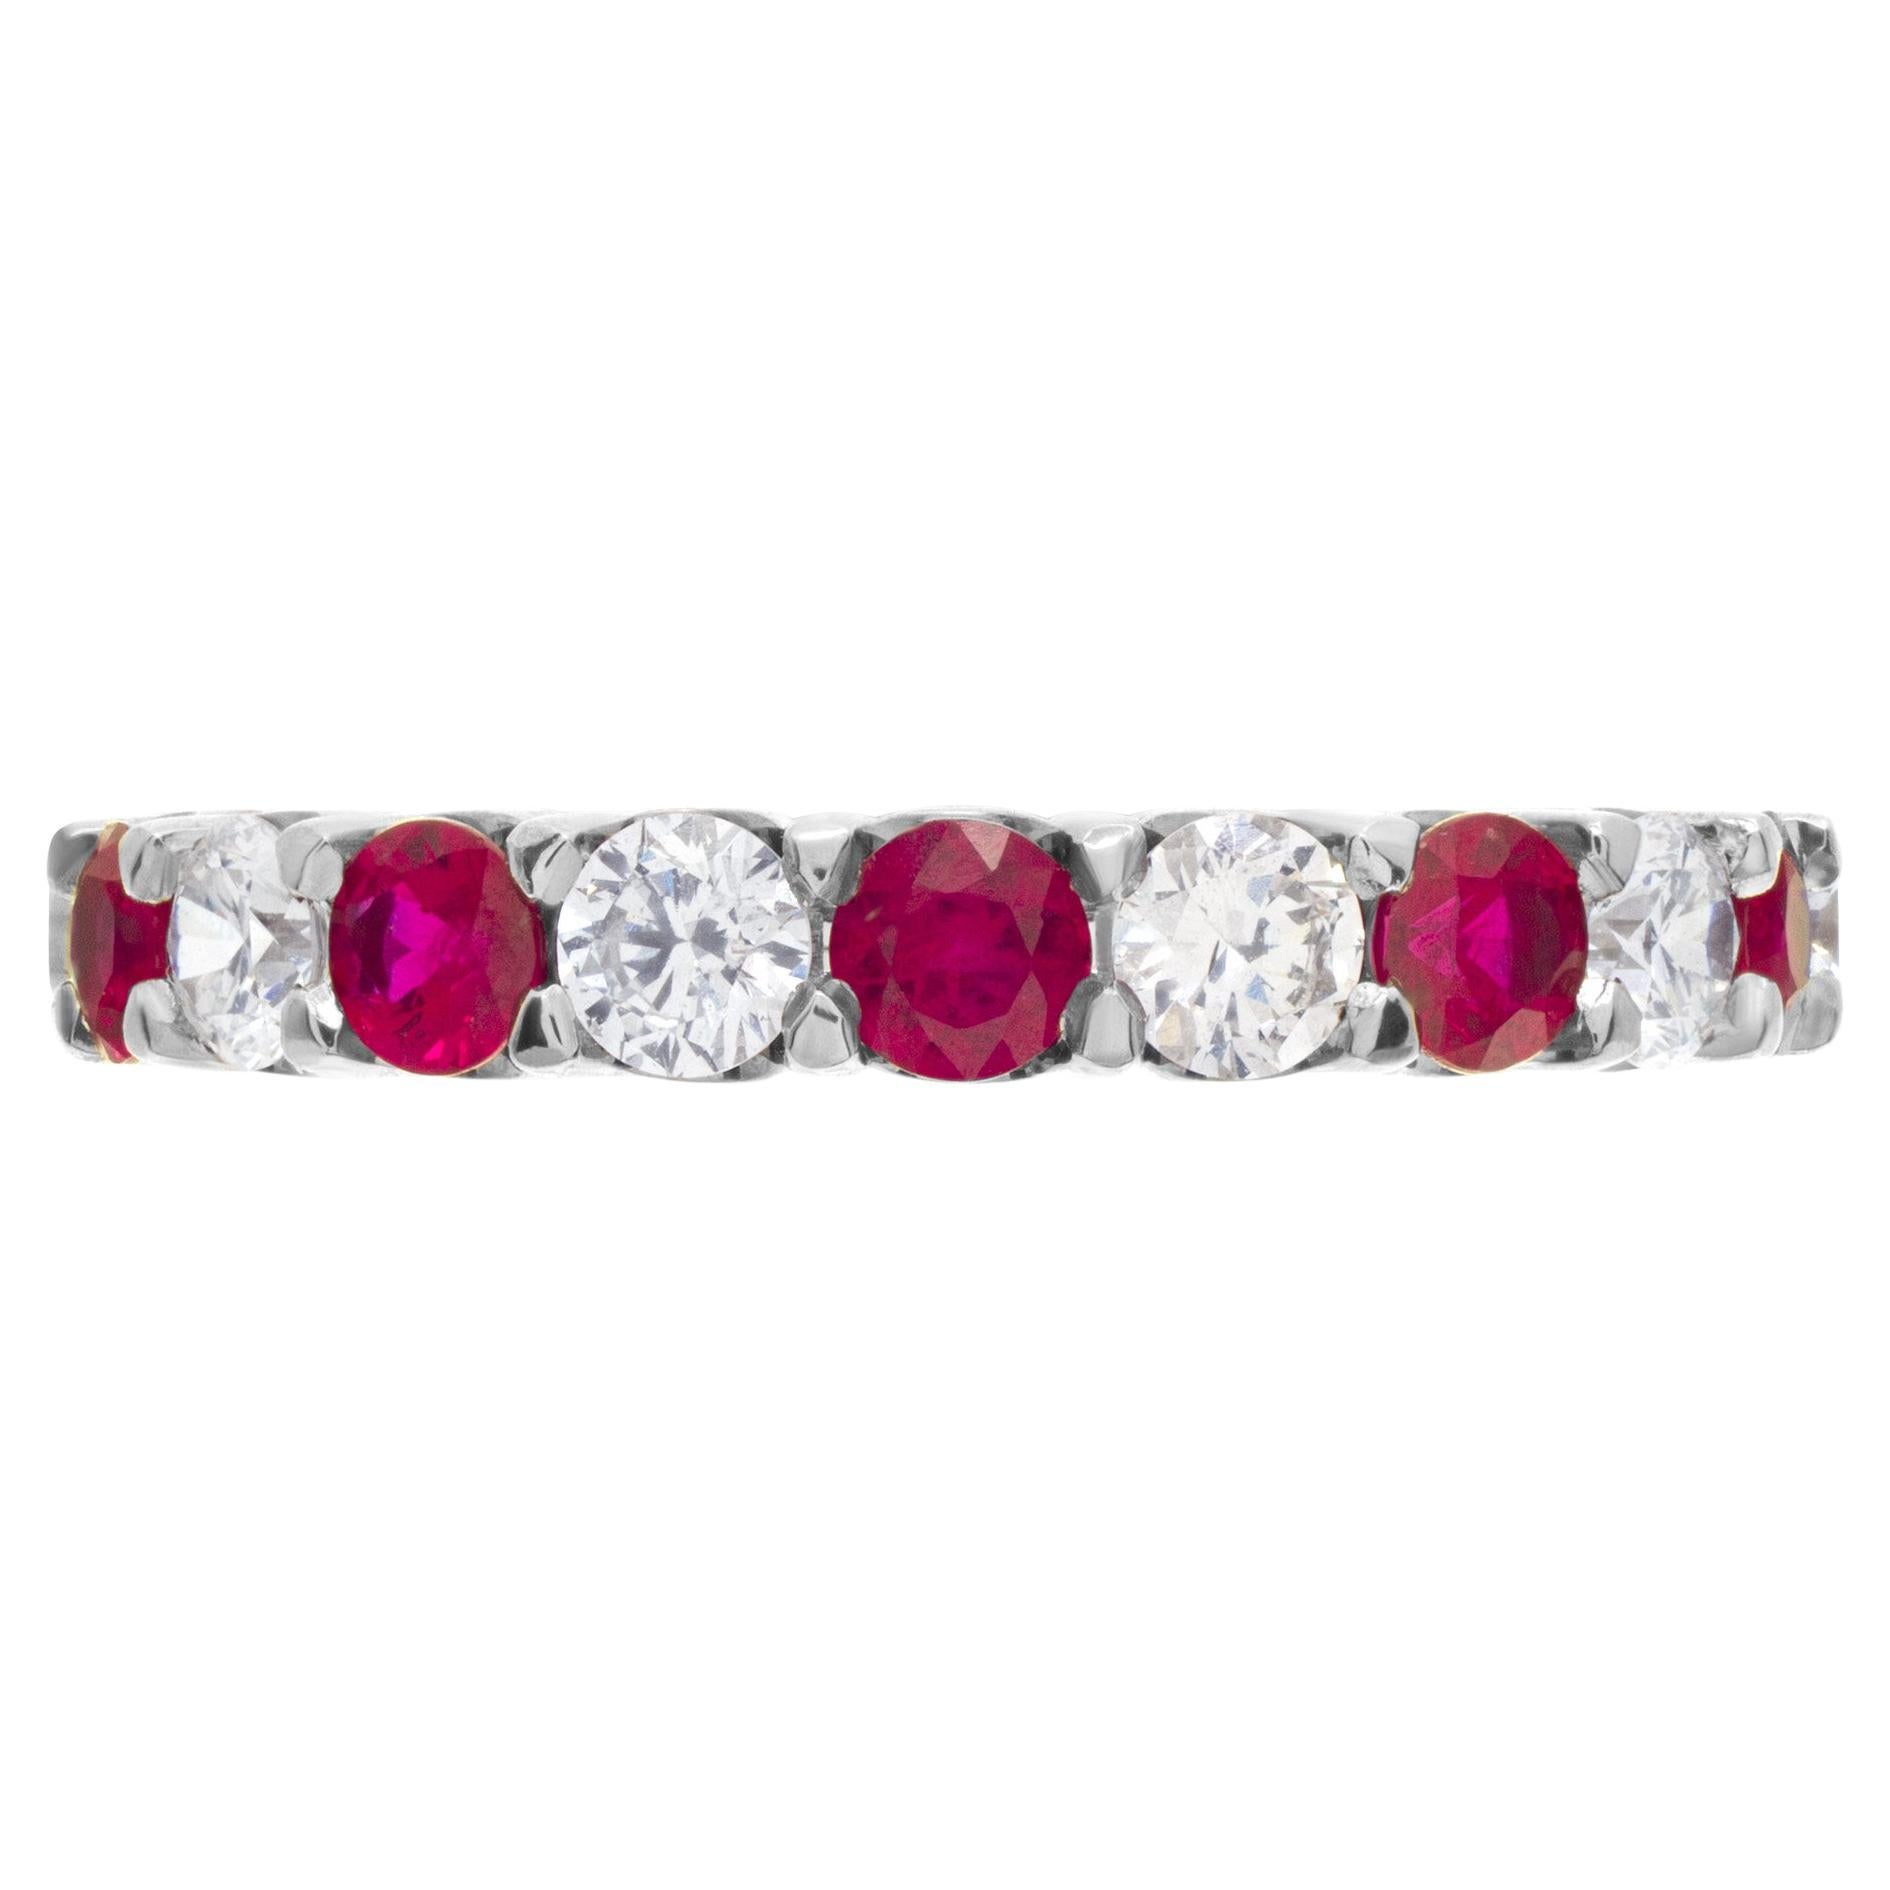 Diamonds & Rubies Diamond Eternity Band and Ring in 18k White Gold